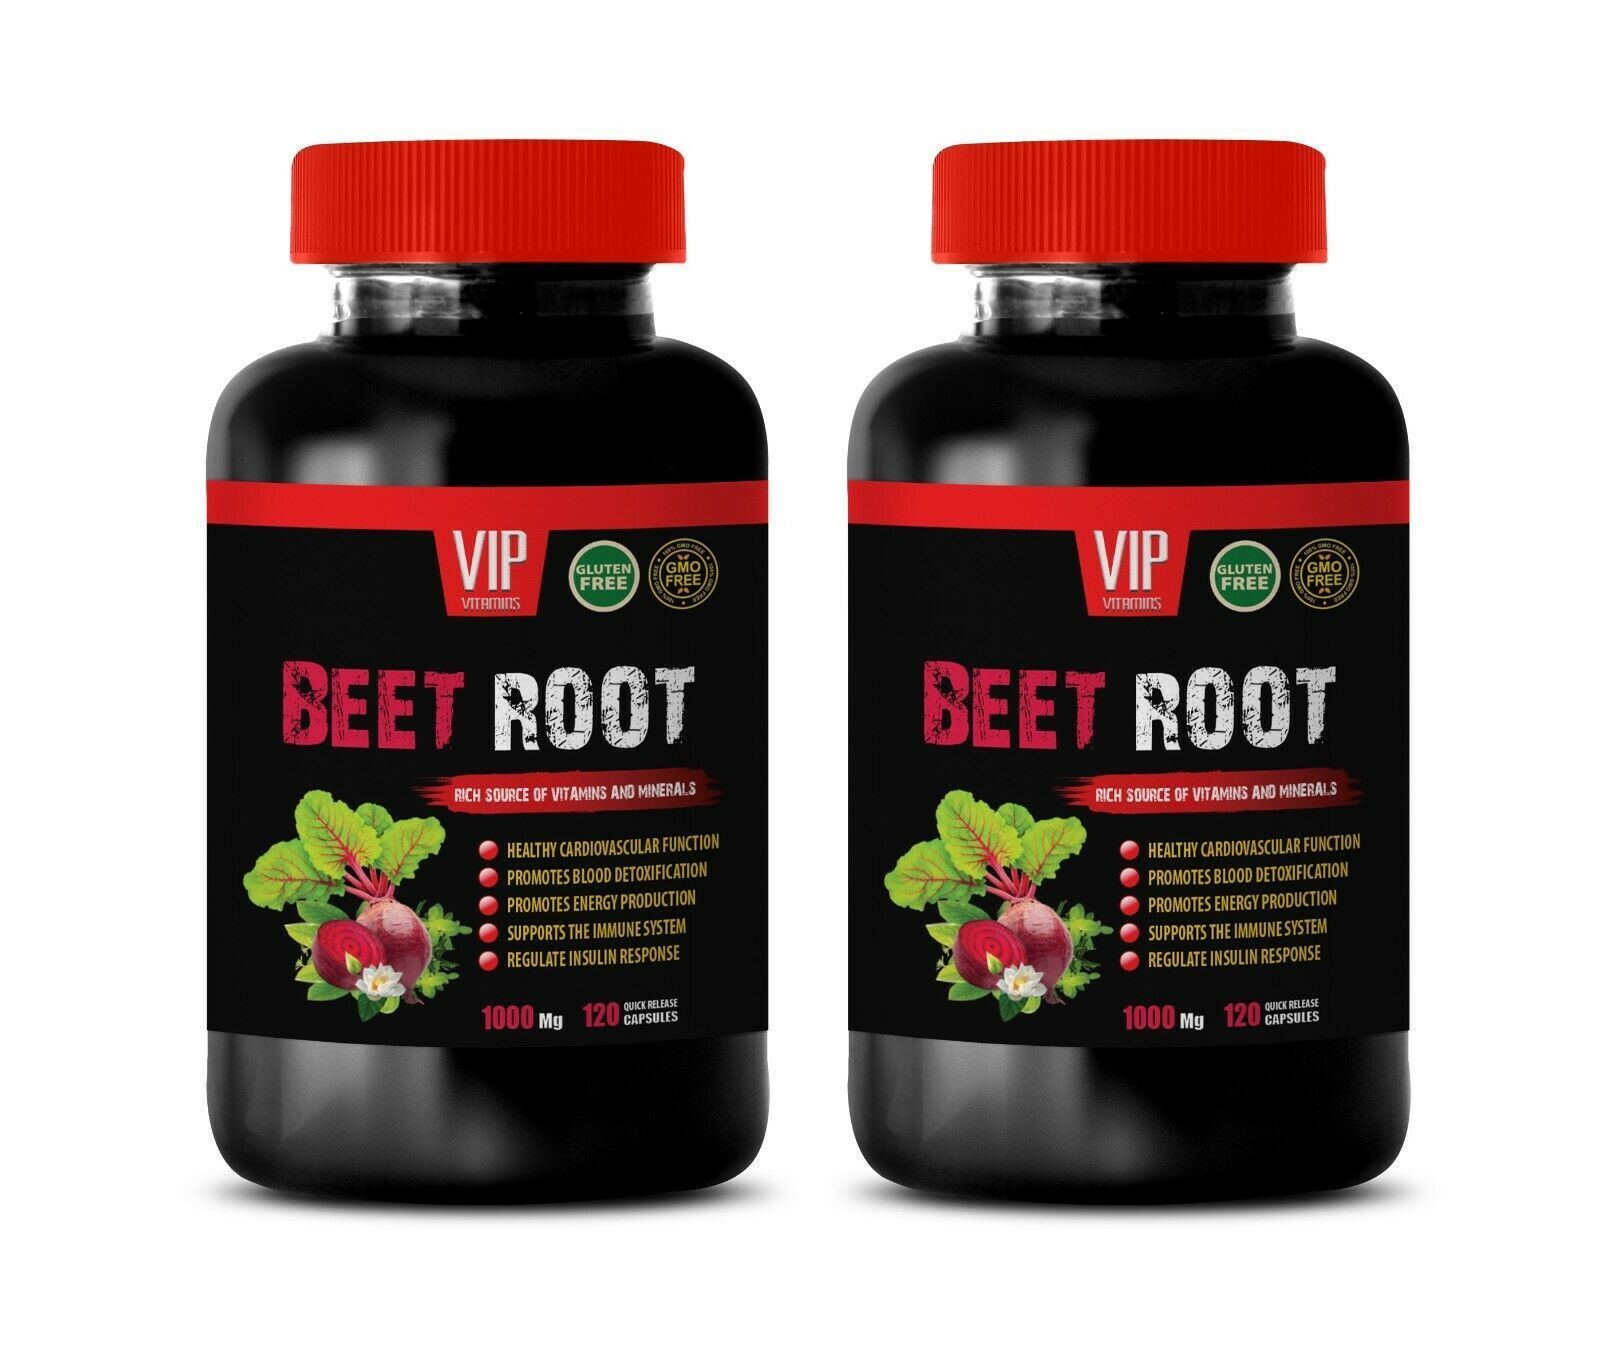 digestion plus - BEET ROOT - natural energy boost 2 BOTTLE - $33.62